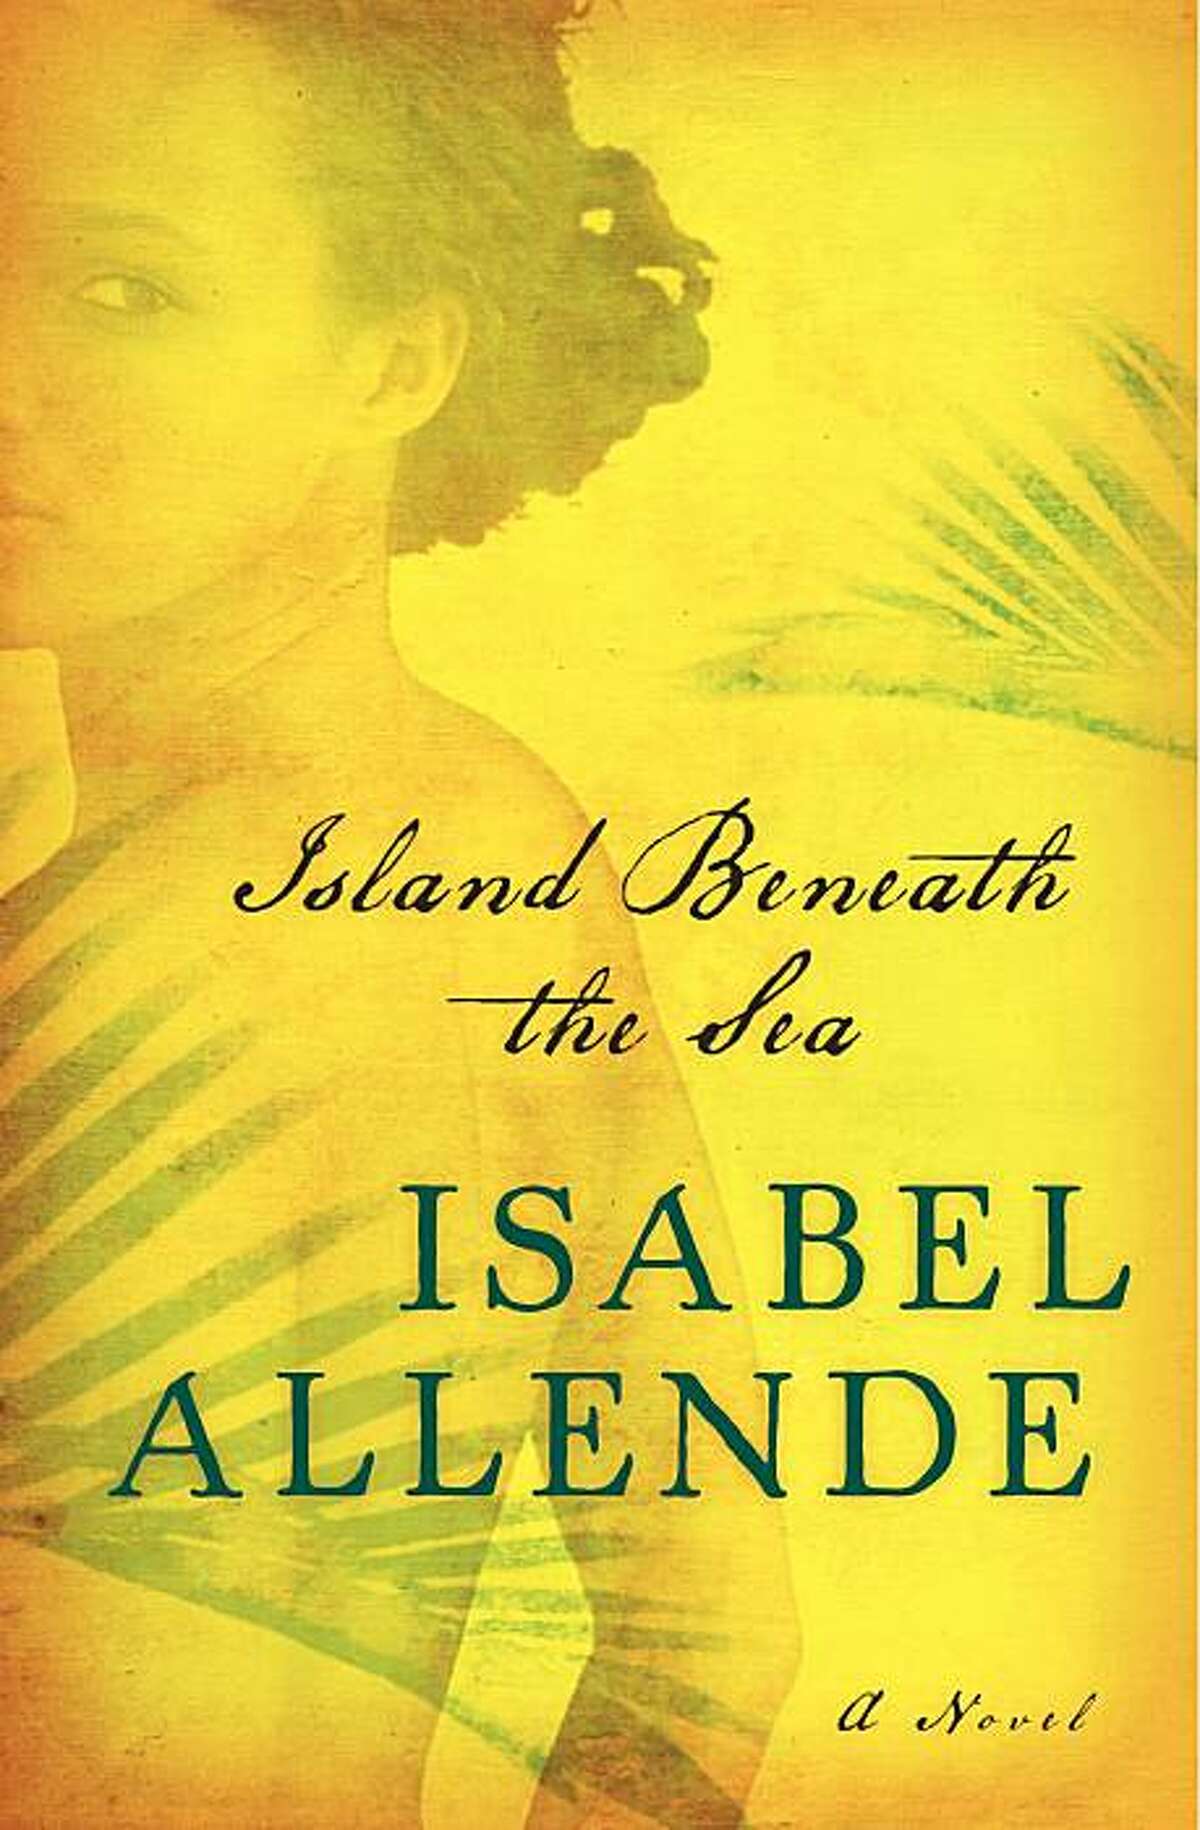 Isabel Allende focuses on slavery in new book